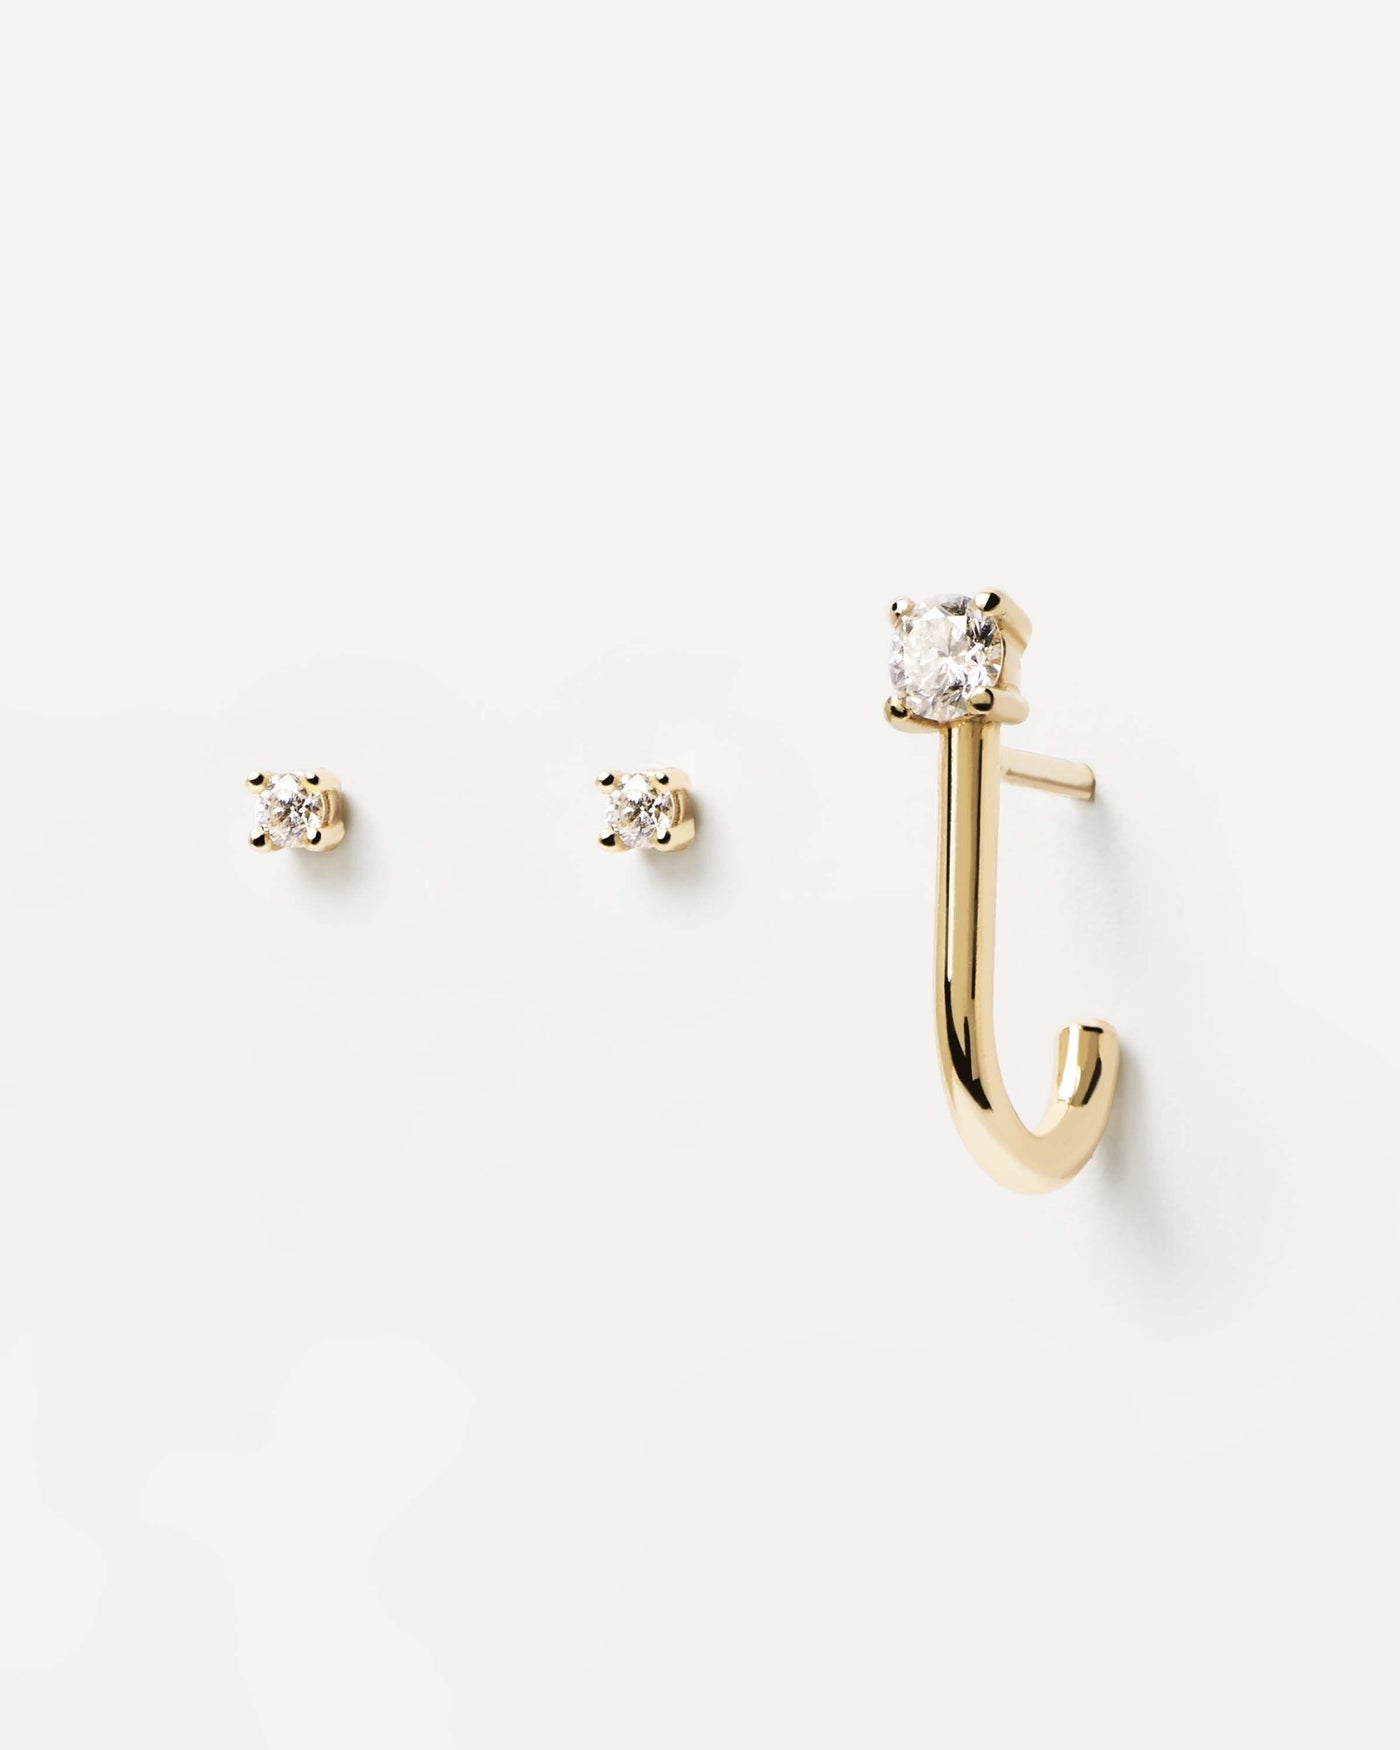 2023 Selection | Diamonds and Gold Solitaire Earrings Set. Solid yellow gold earring set with 3 individual diamond solitaire studs, making 0.16 carats. Get the latest arrival from PDPAOLA. Place your order safely and get this Best Seller. Free Shipping.